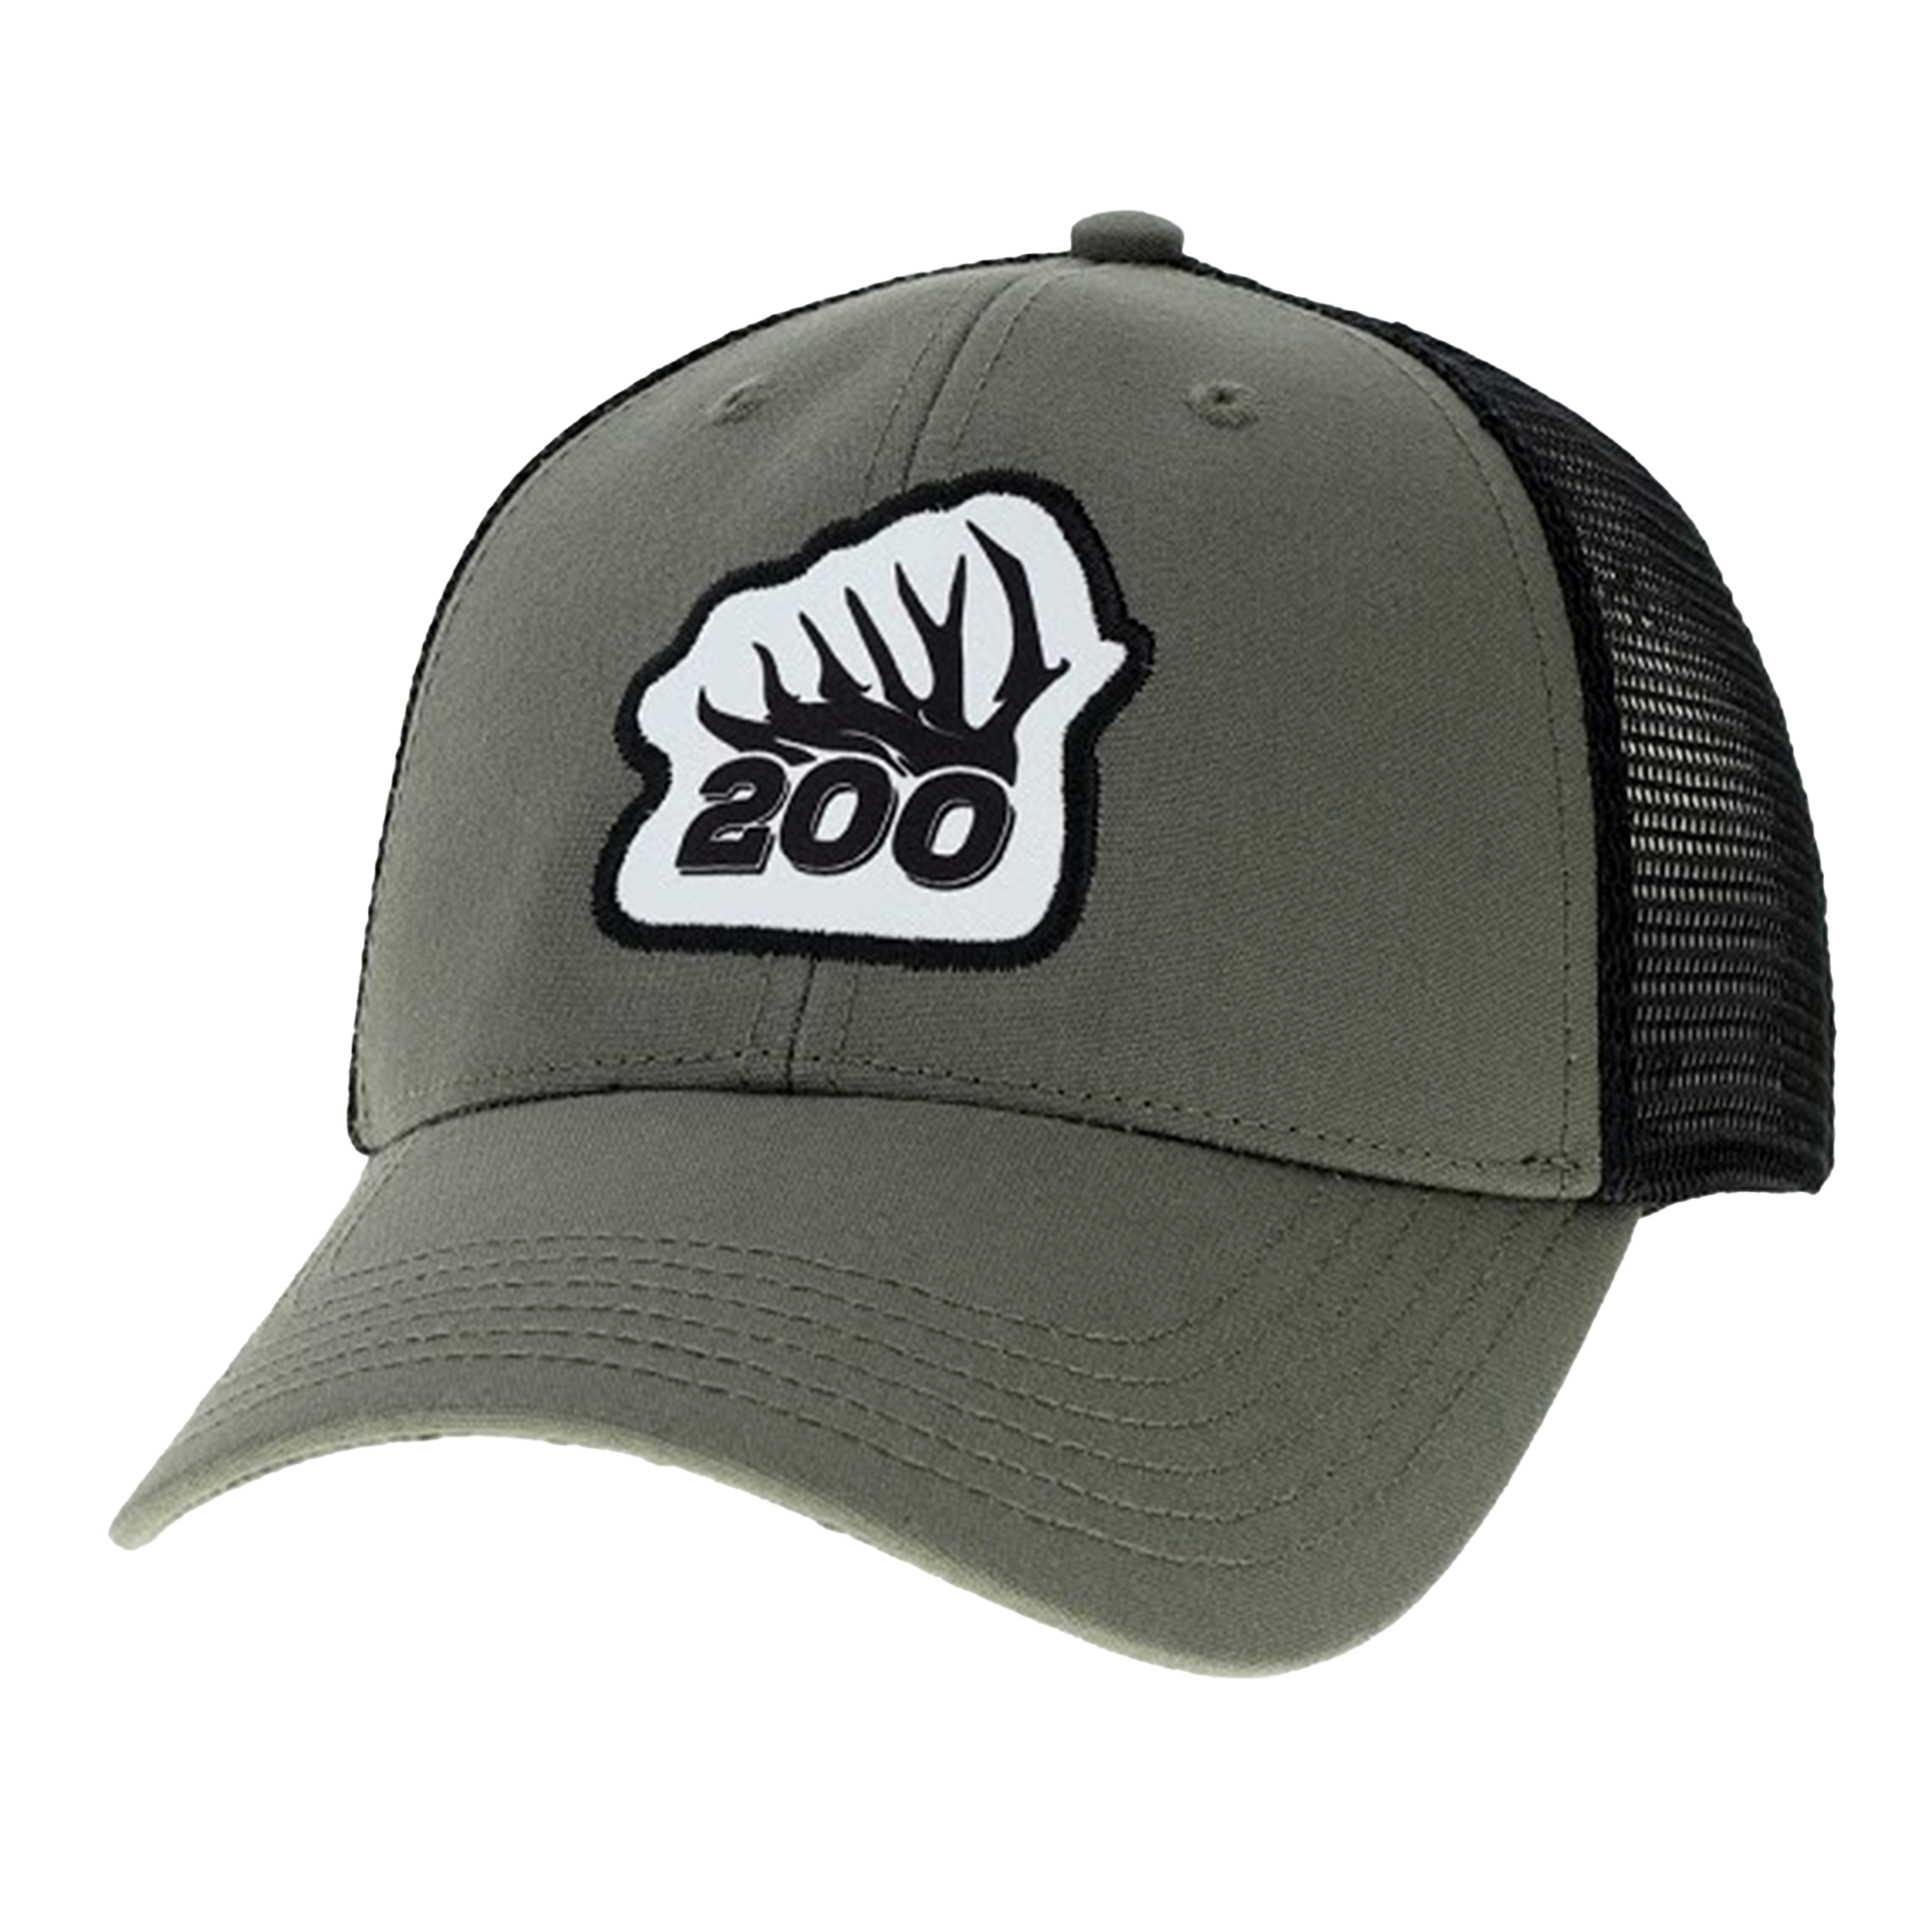 200 Olive/Black Mesh - Stitched Patch